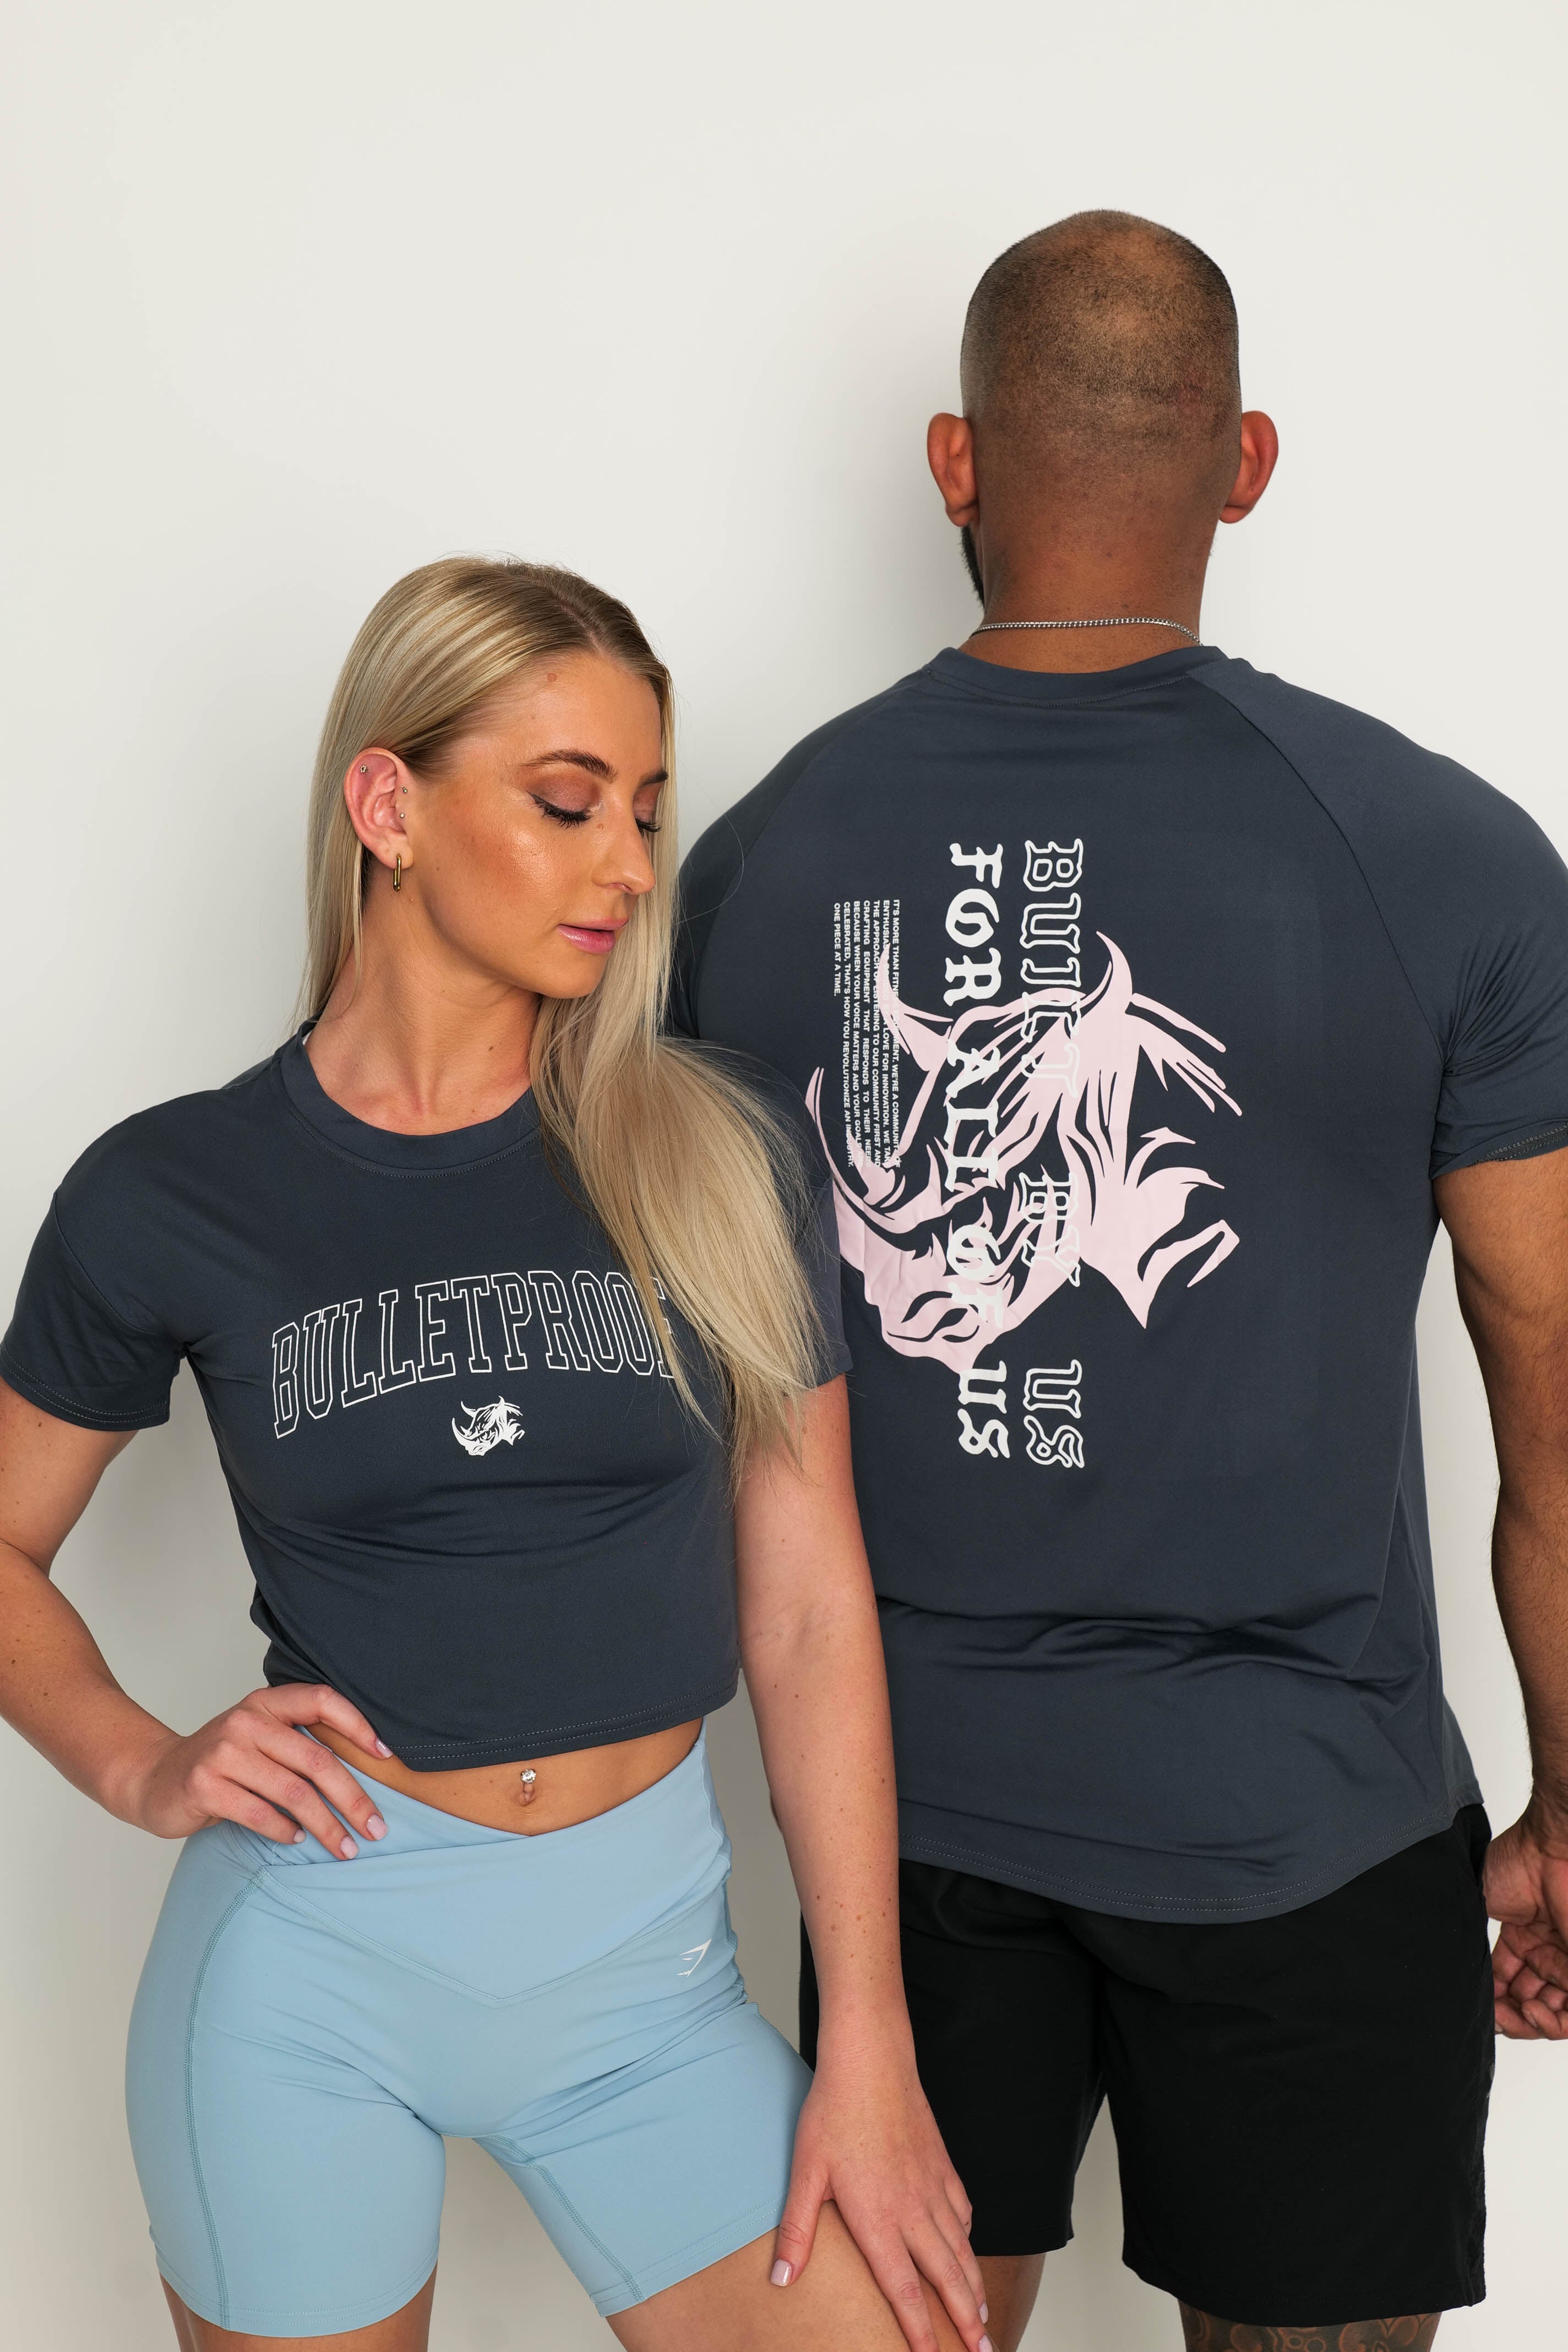 T-SHIRT - Bulletproof Unity: Built by Us for Us